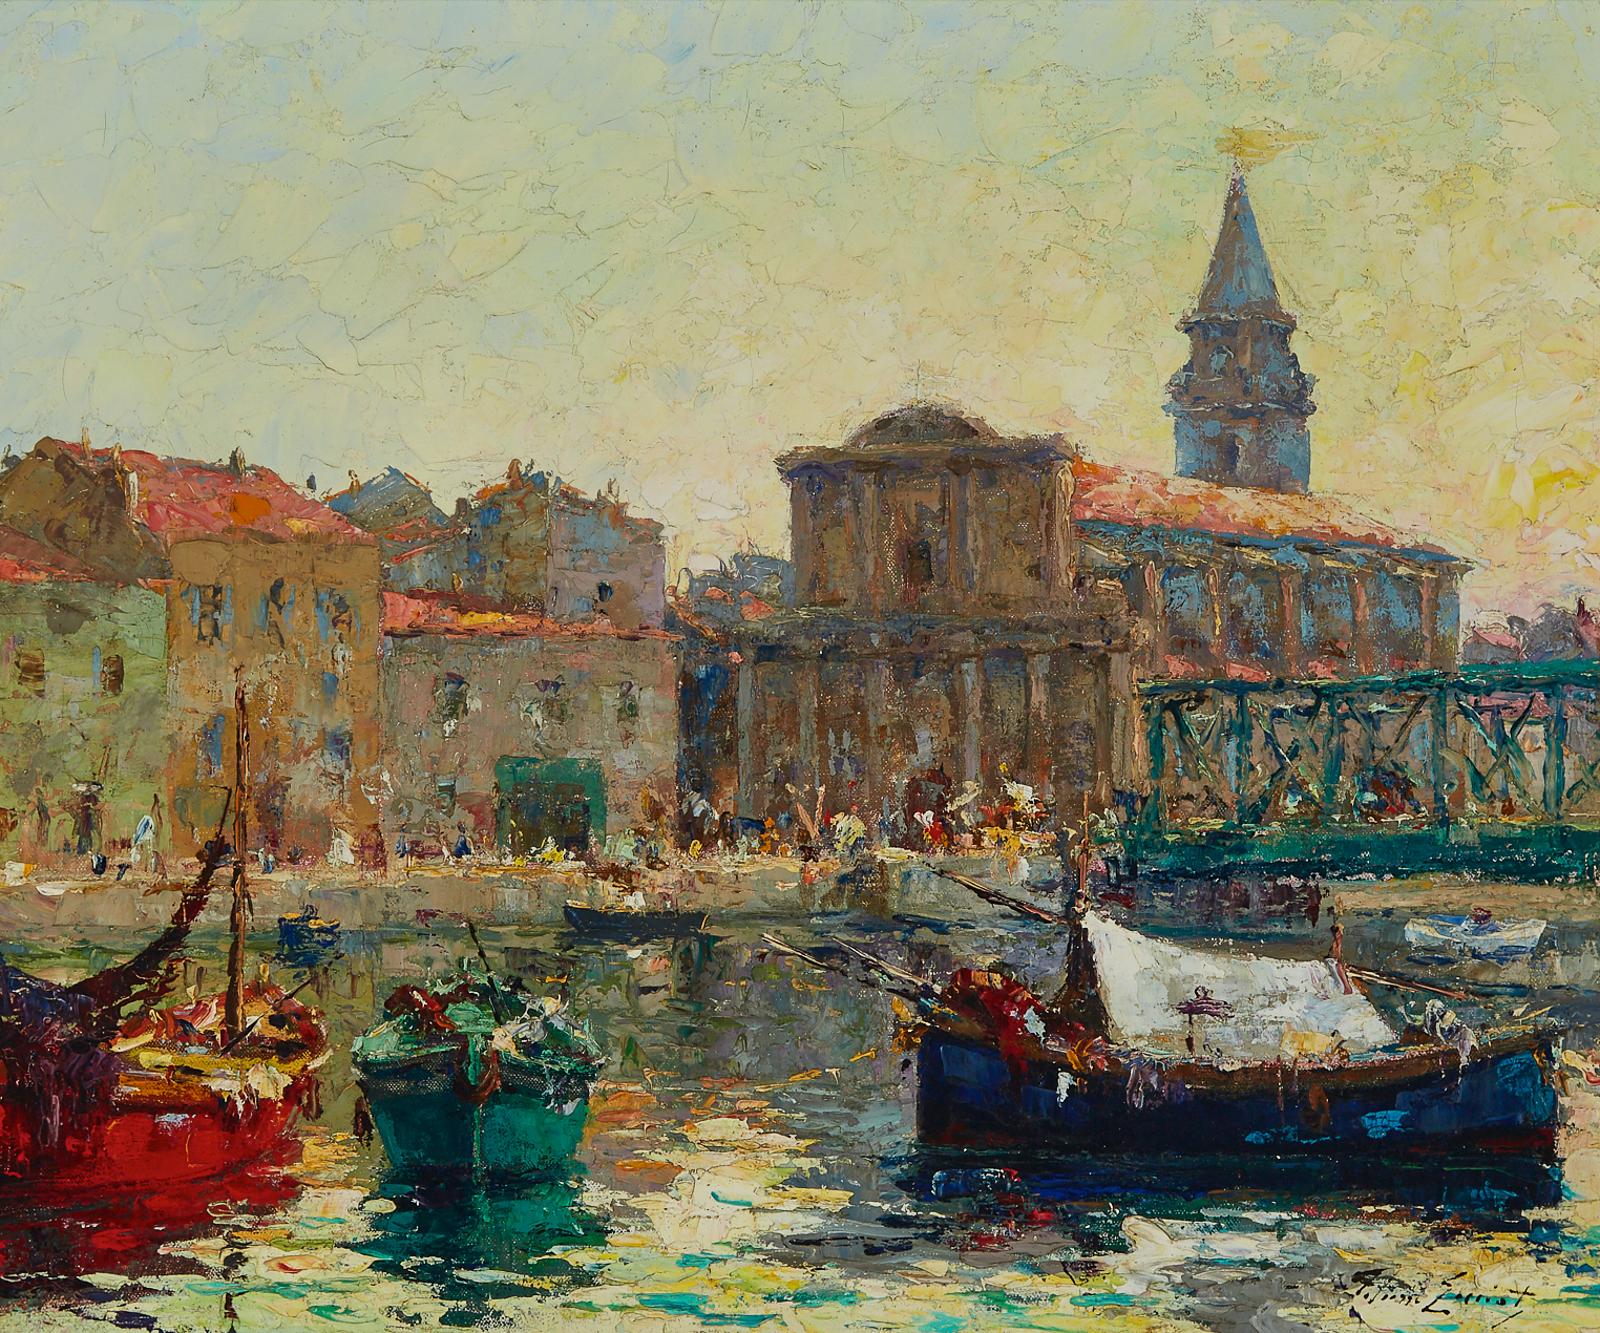 Pierre-Paul Emiot (1887-1950) - Busy Harbour With Boats